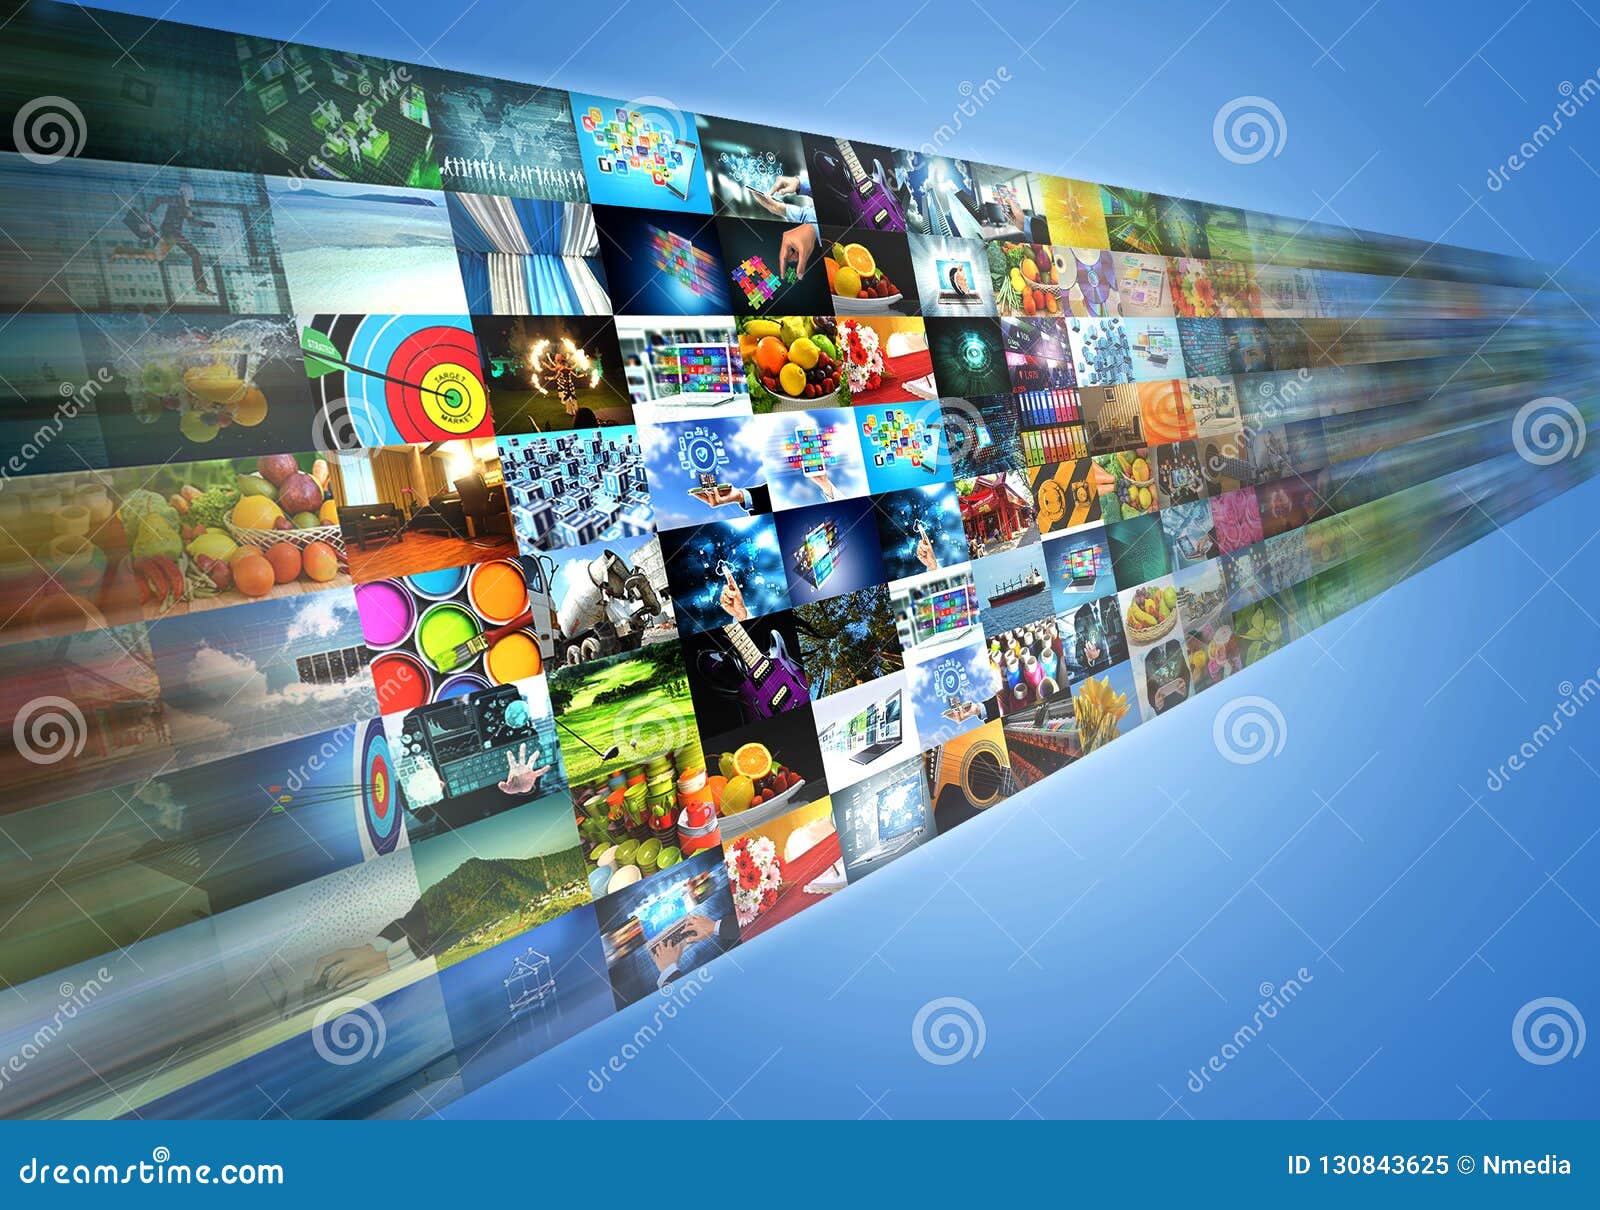 internet multimedia sharing and streaming entertainment